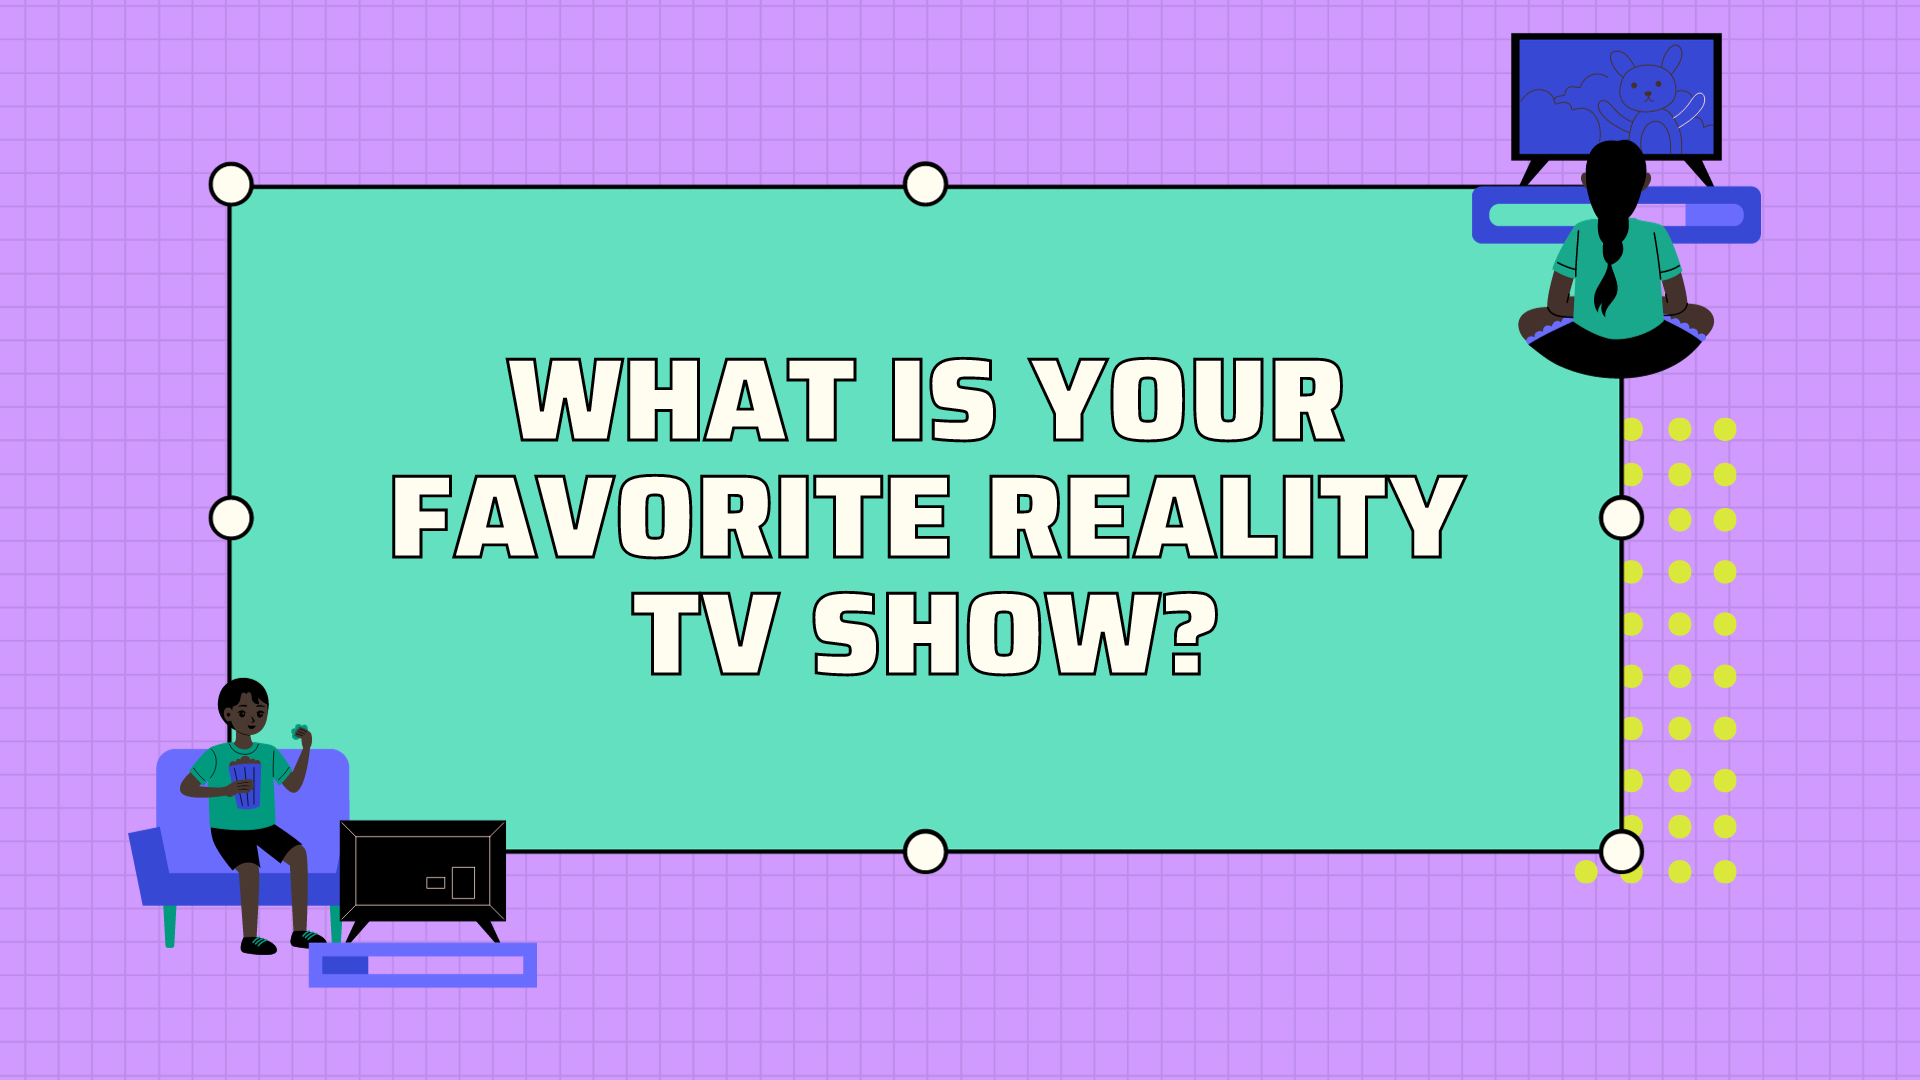 B.O.B: What is your favorite reality tv show?